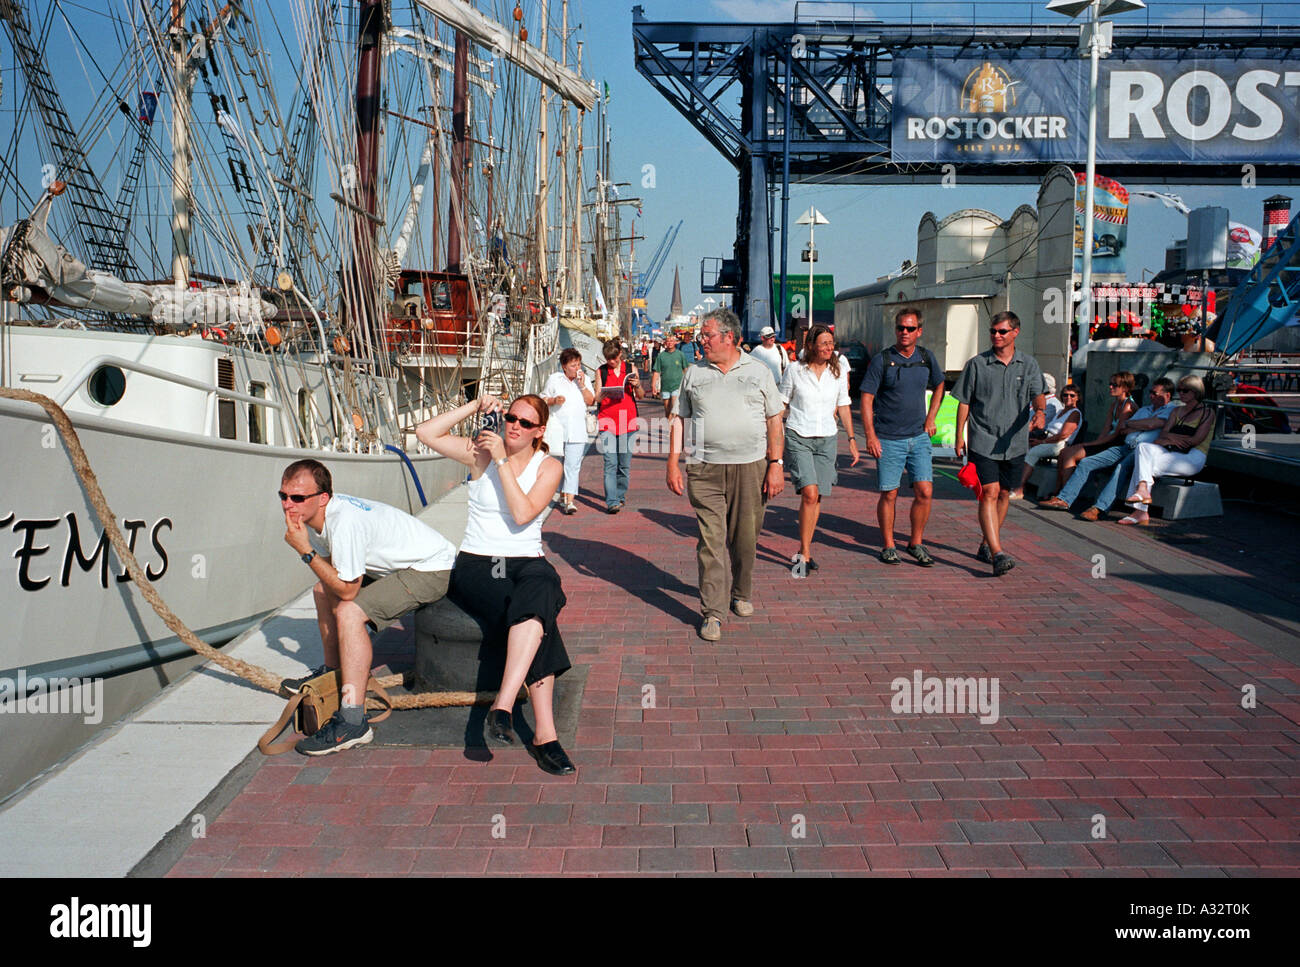 People on a harbour promenade, Rostock, Germany Stock Photo